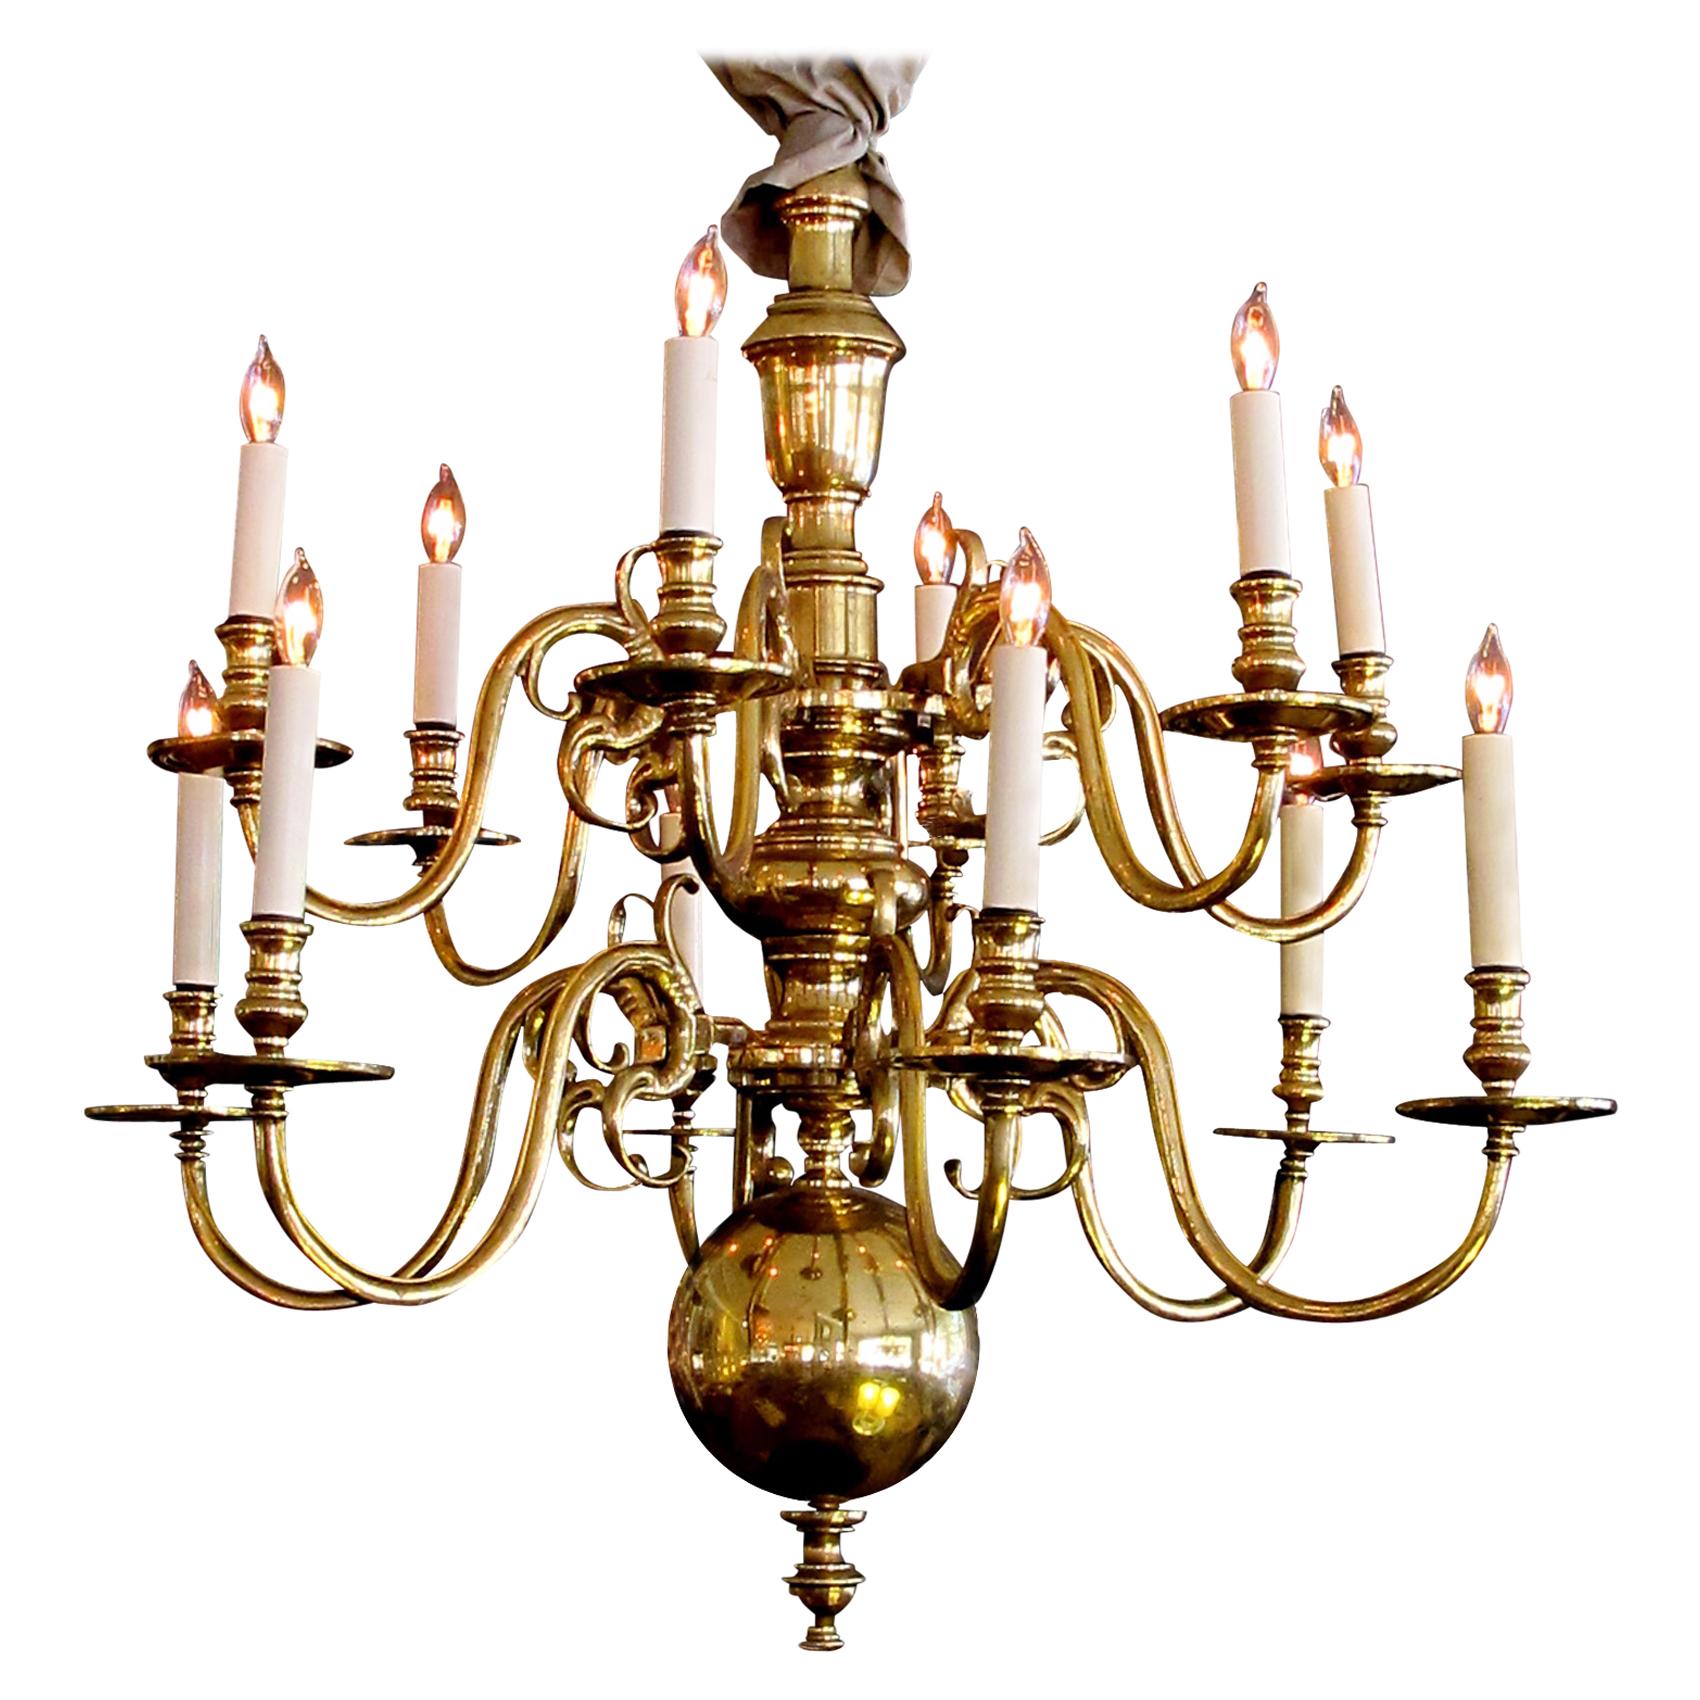 Large-Scaled and Good Quality Dutch Colonial Style Brass 12-Light Chandelier